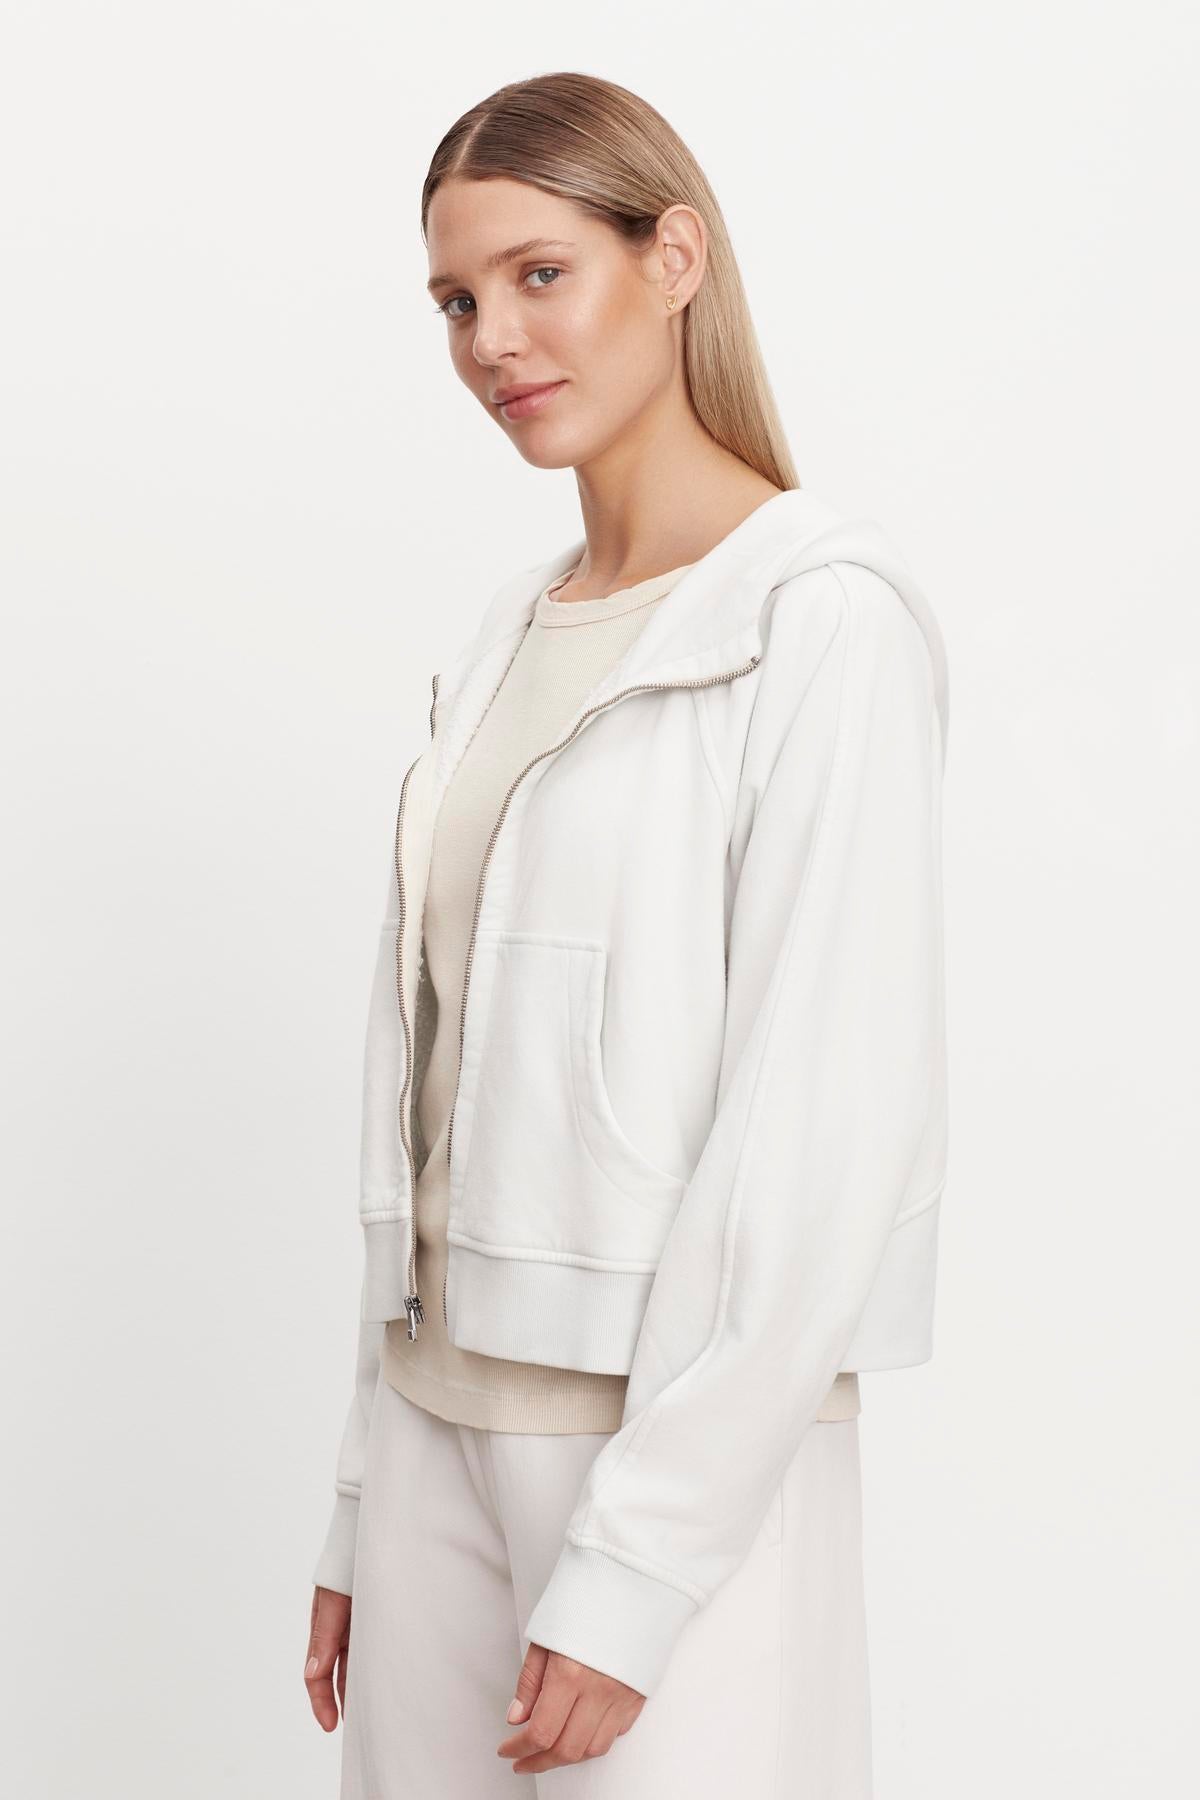   The model is wearing a white TORY SOFT FLEECE HOODIE jacket and pants. (Brand name: Velvet by Graham & Spencer) 